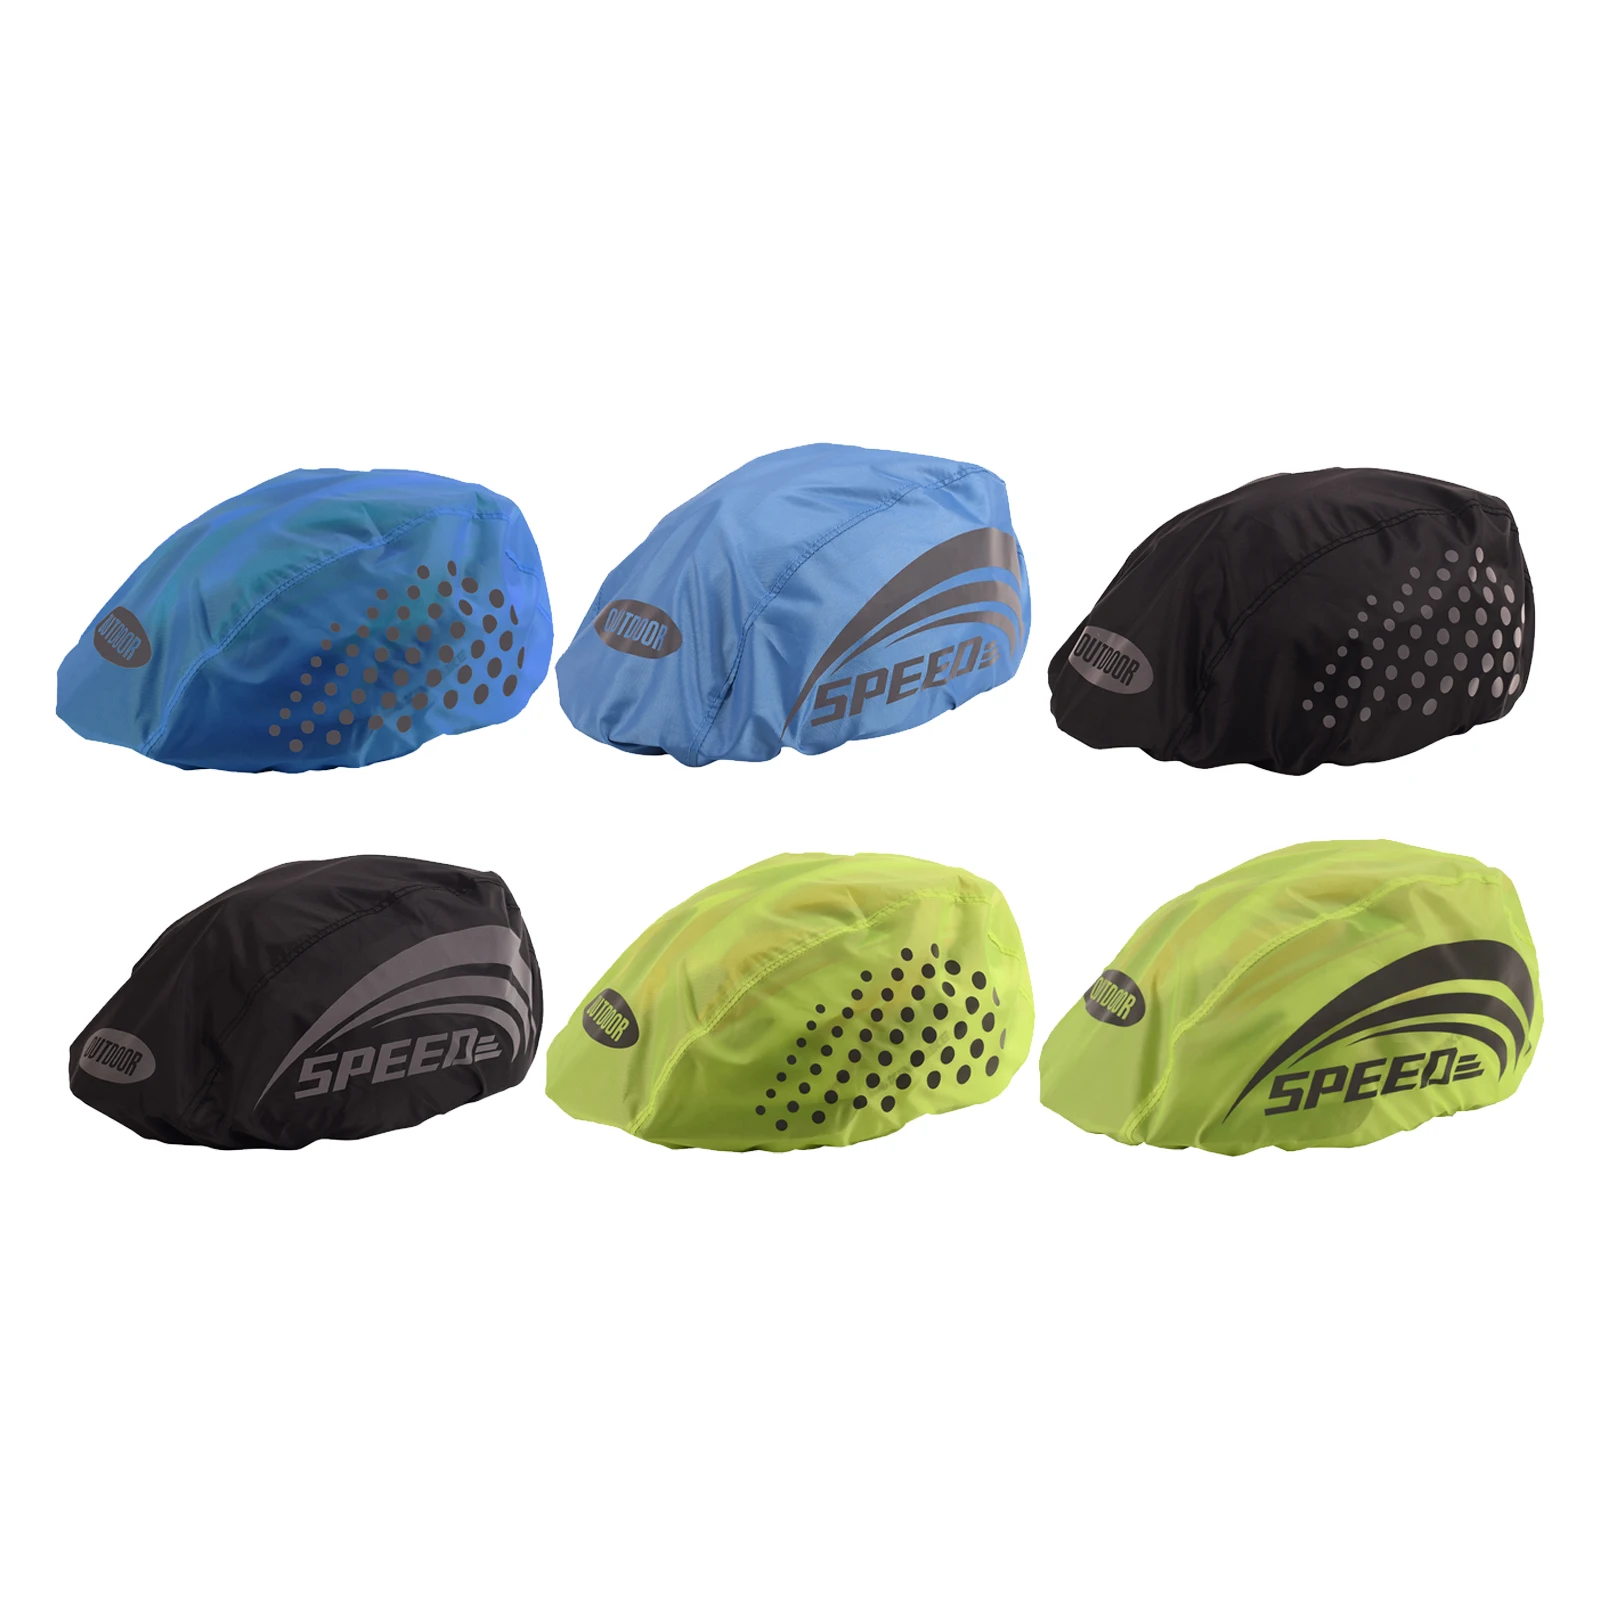 Waterproof Cycling Helmet Cover Reflective Strip Windproof Mountain Road Bicycle Shield Protector Camping Rider Outdoor Cycling